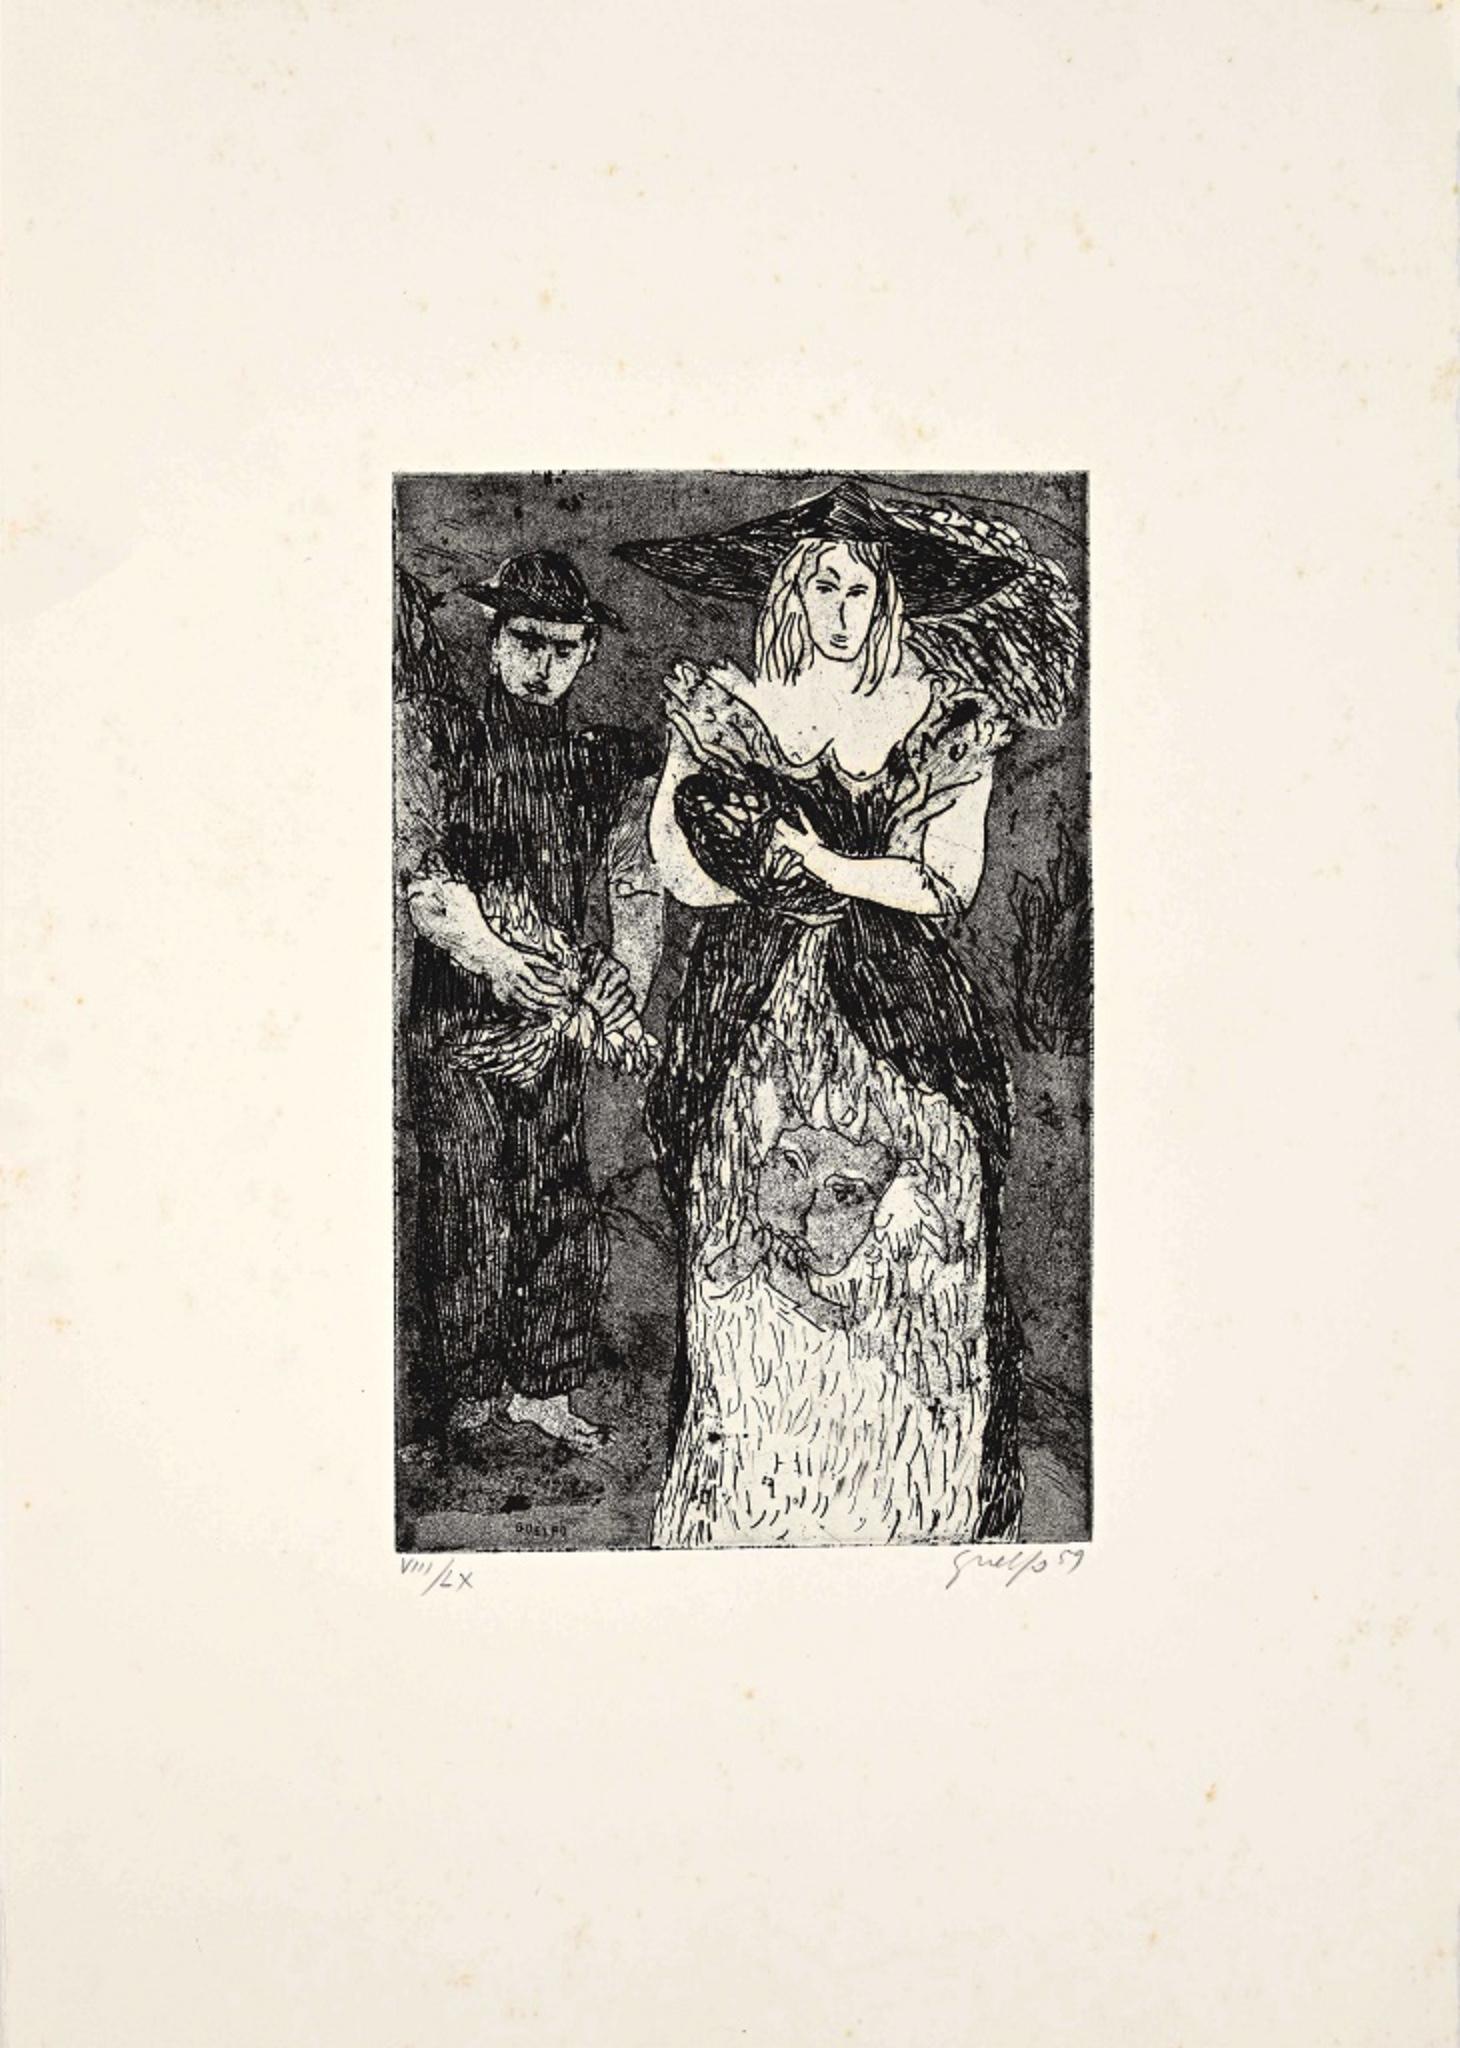 Figures 3 is an original etching realized by Guelfo Bianchini in 1959.

The artwork is hand-signed by the artist on the lower right corner, and numbered (8/60) on the lower left corner.

In very good conditions and mounted on a white cardboard